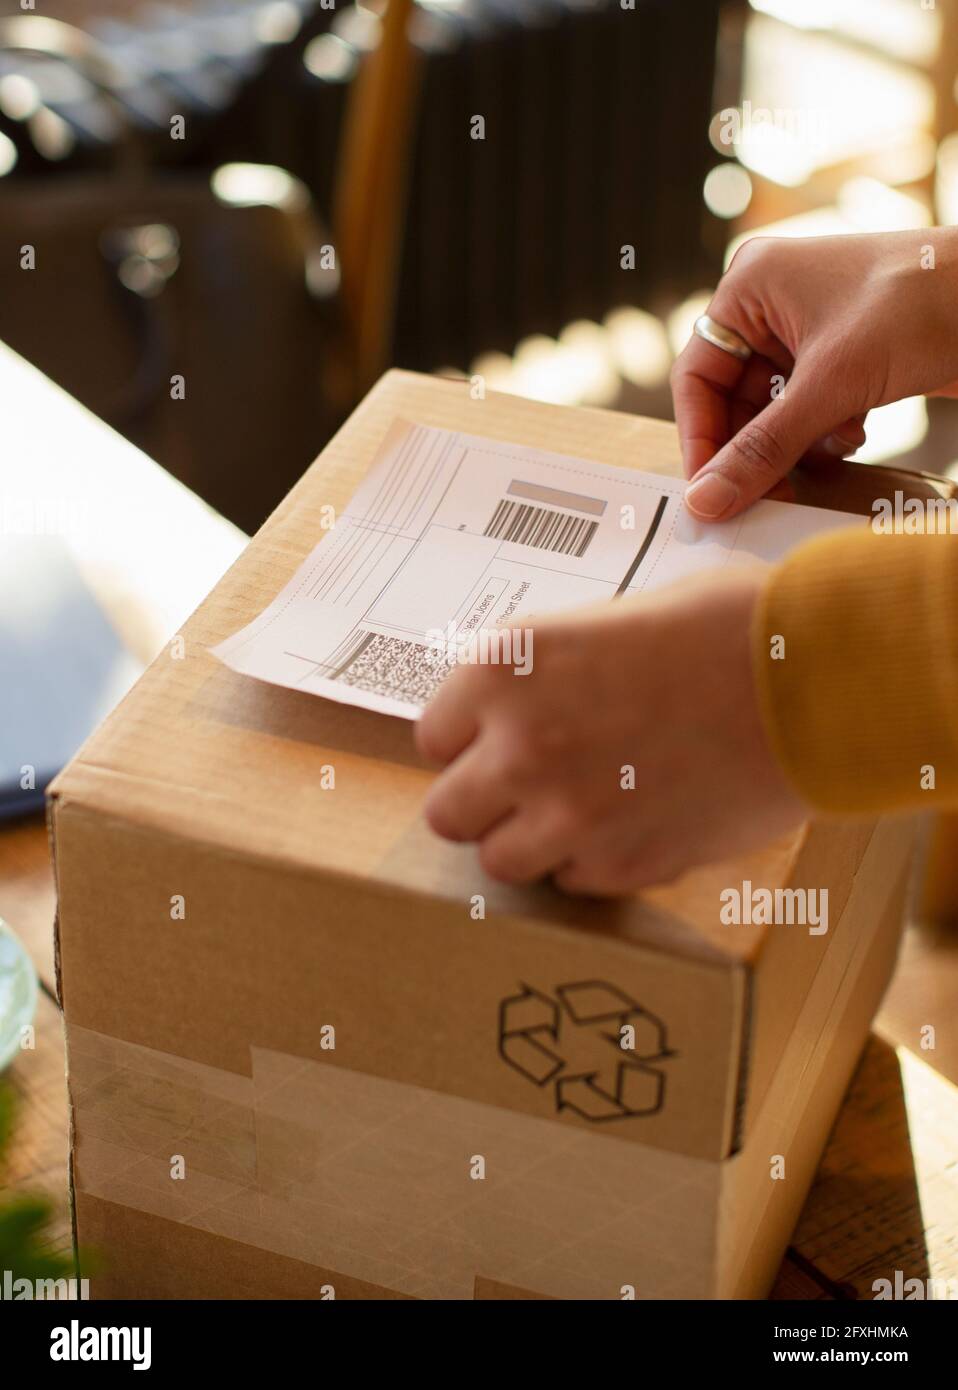 Close up business owner placing shipping label on box Stock Photo